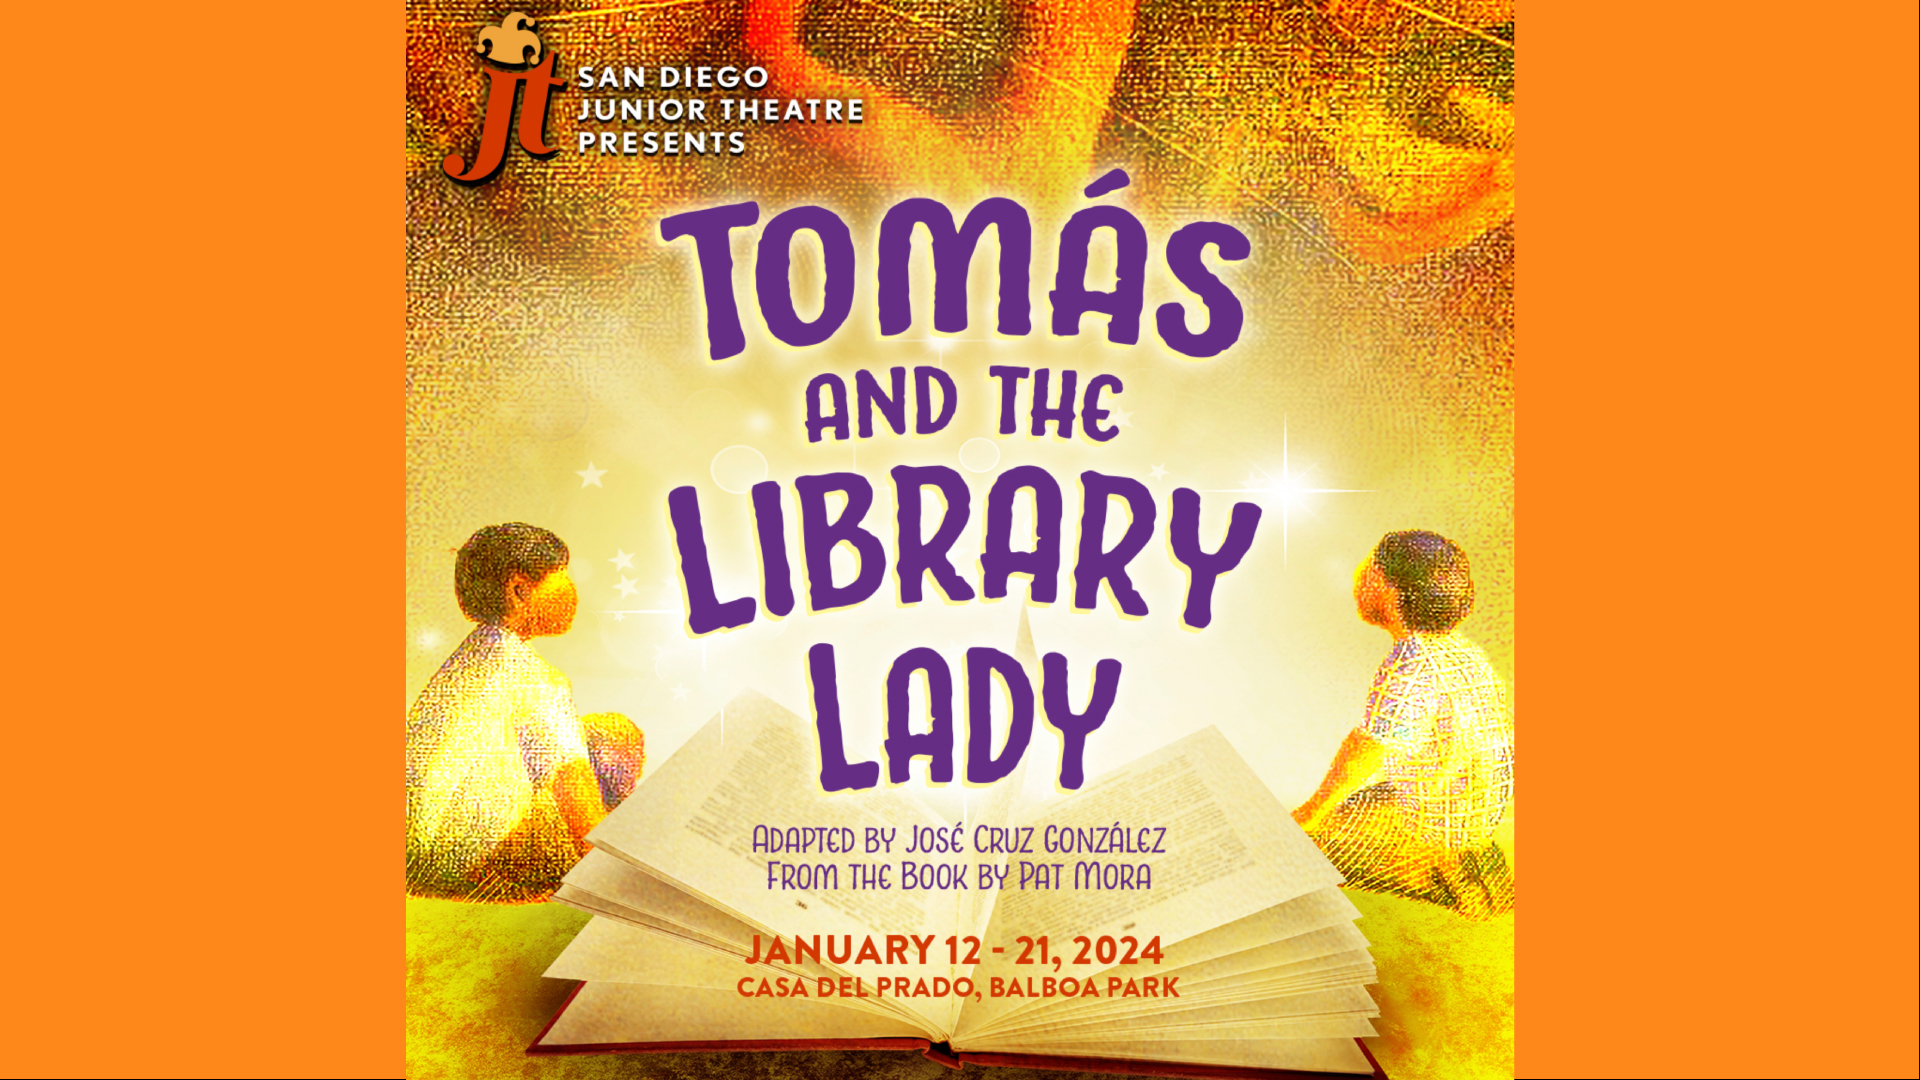 San Diego Junior Theater TOMÁS AND THE LIBRARY LADY